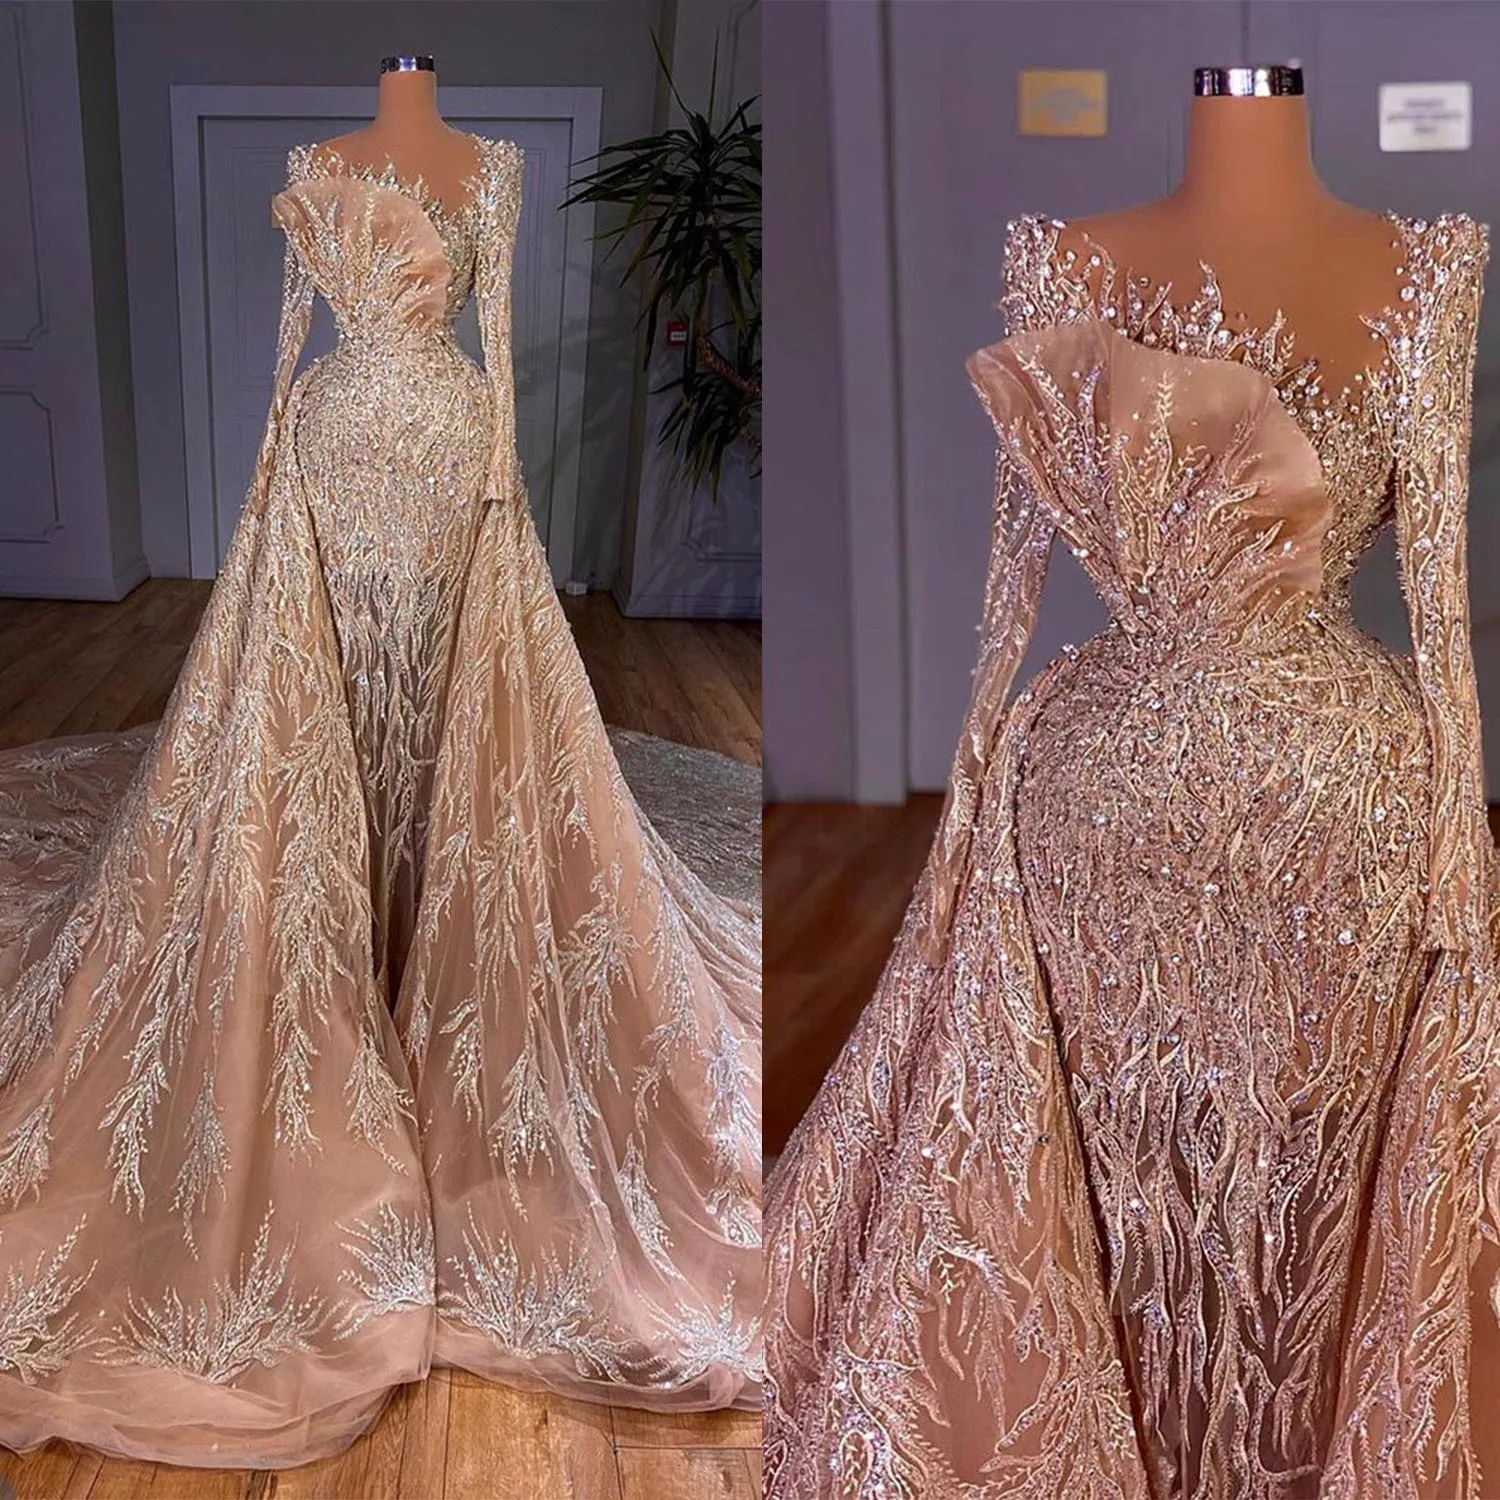 

Luxurious Beading Evening Dresses Saudi Arabia Full Sleeve Lace Formal Dress For Women Prom Gowns Celebrity Robe De Soiree